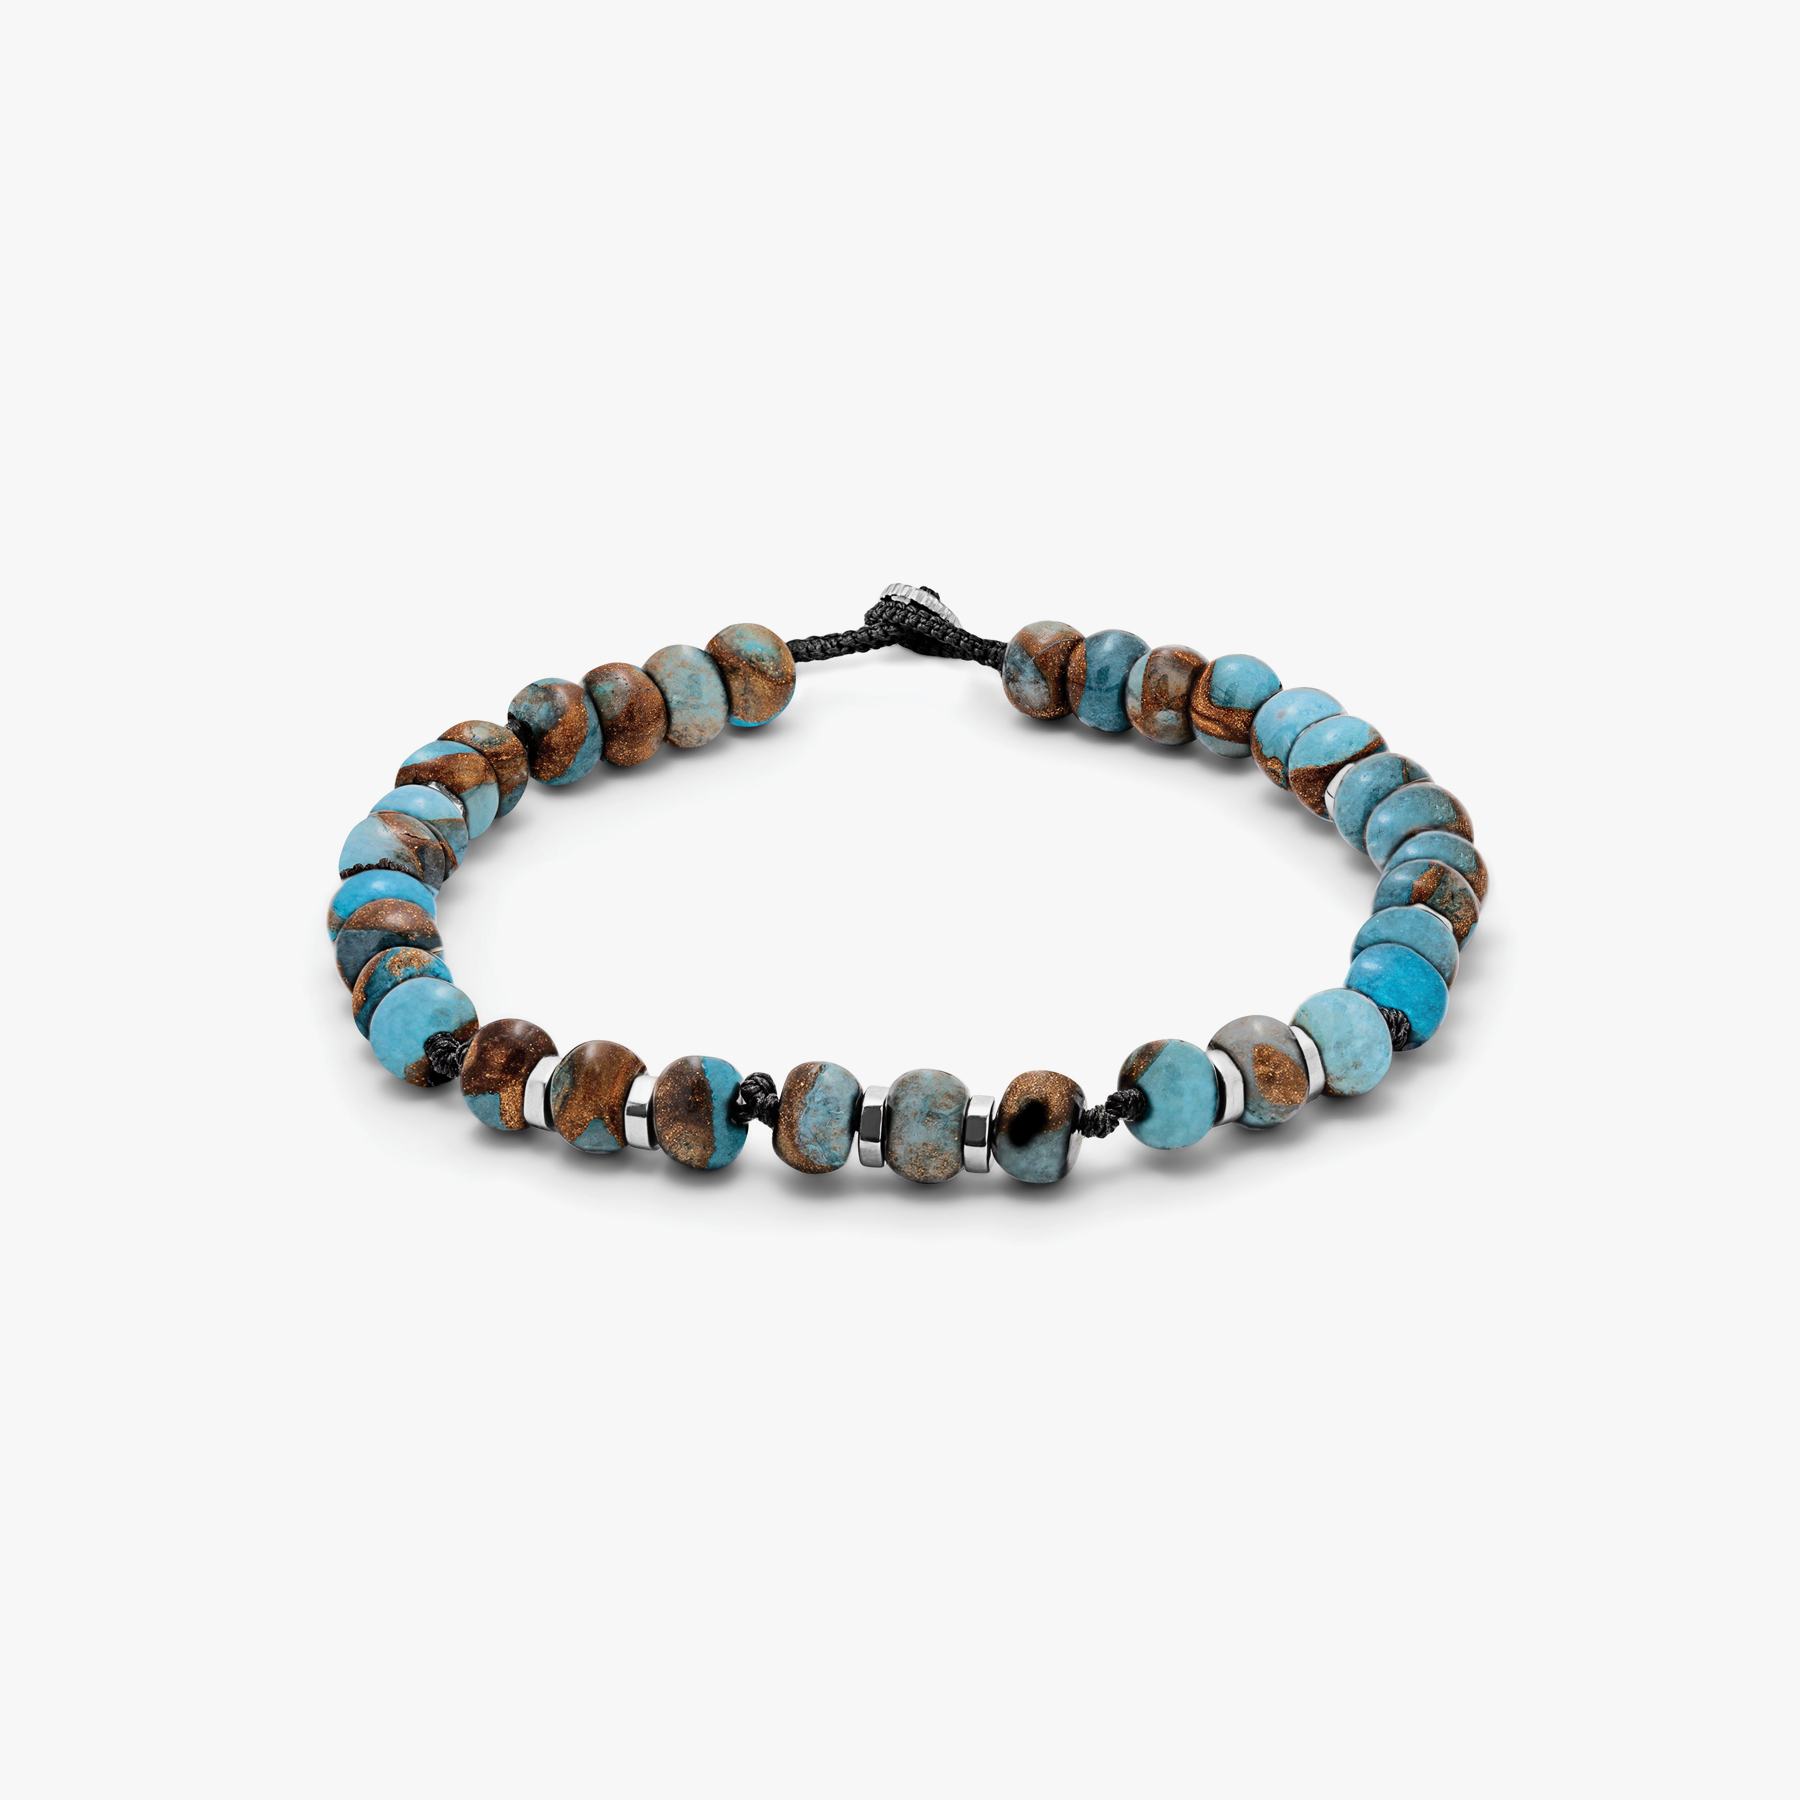 Men's Beaded Bracelet With Light Blue And Silver Disc Beads